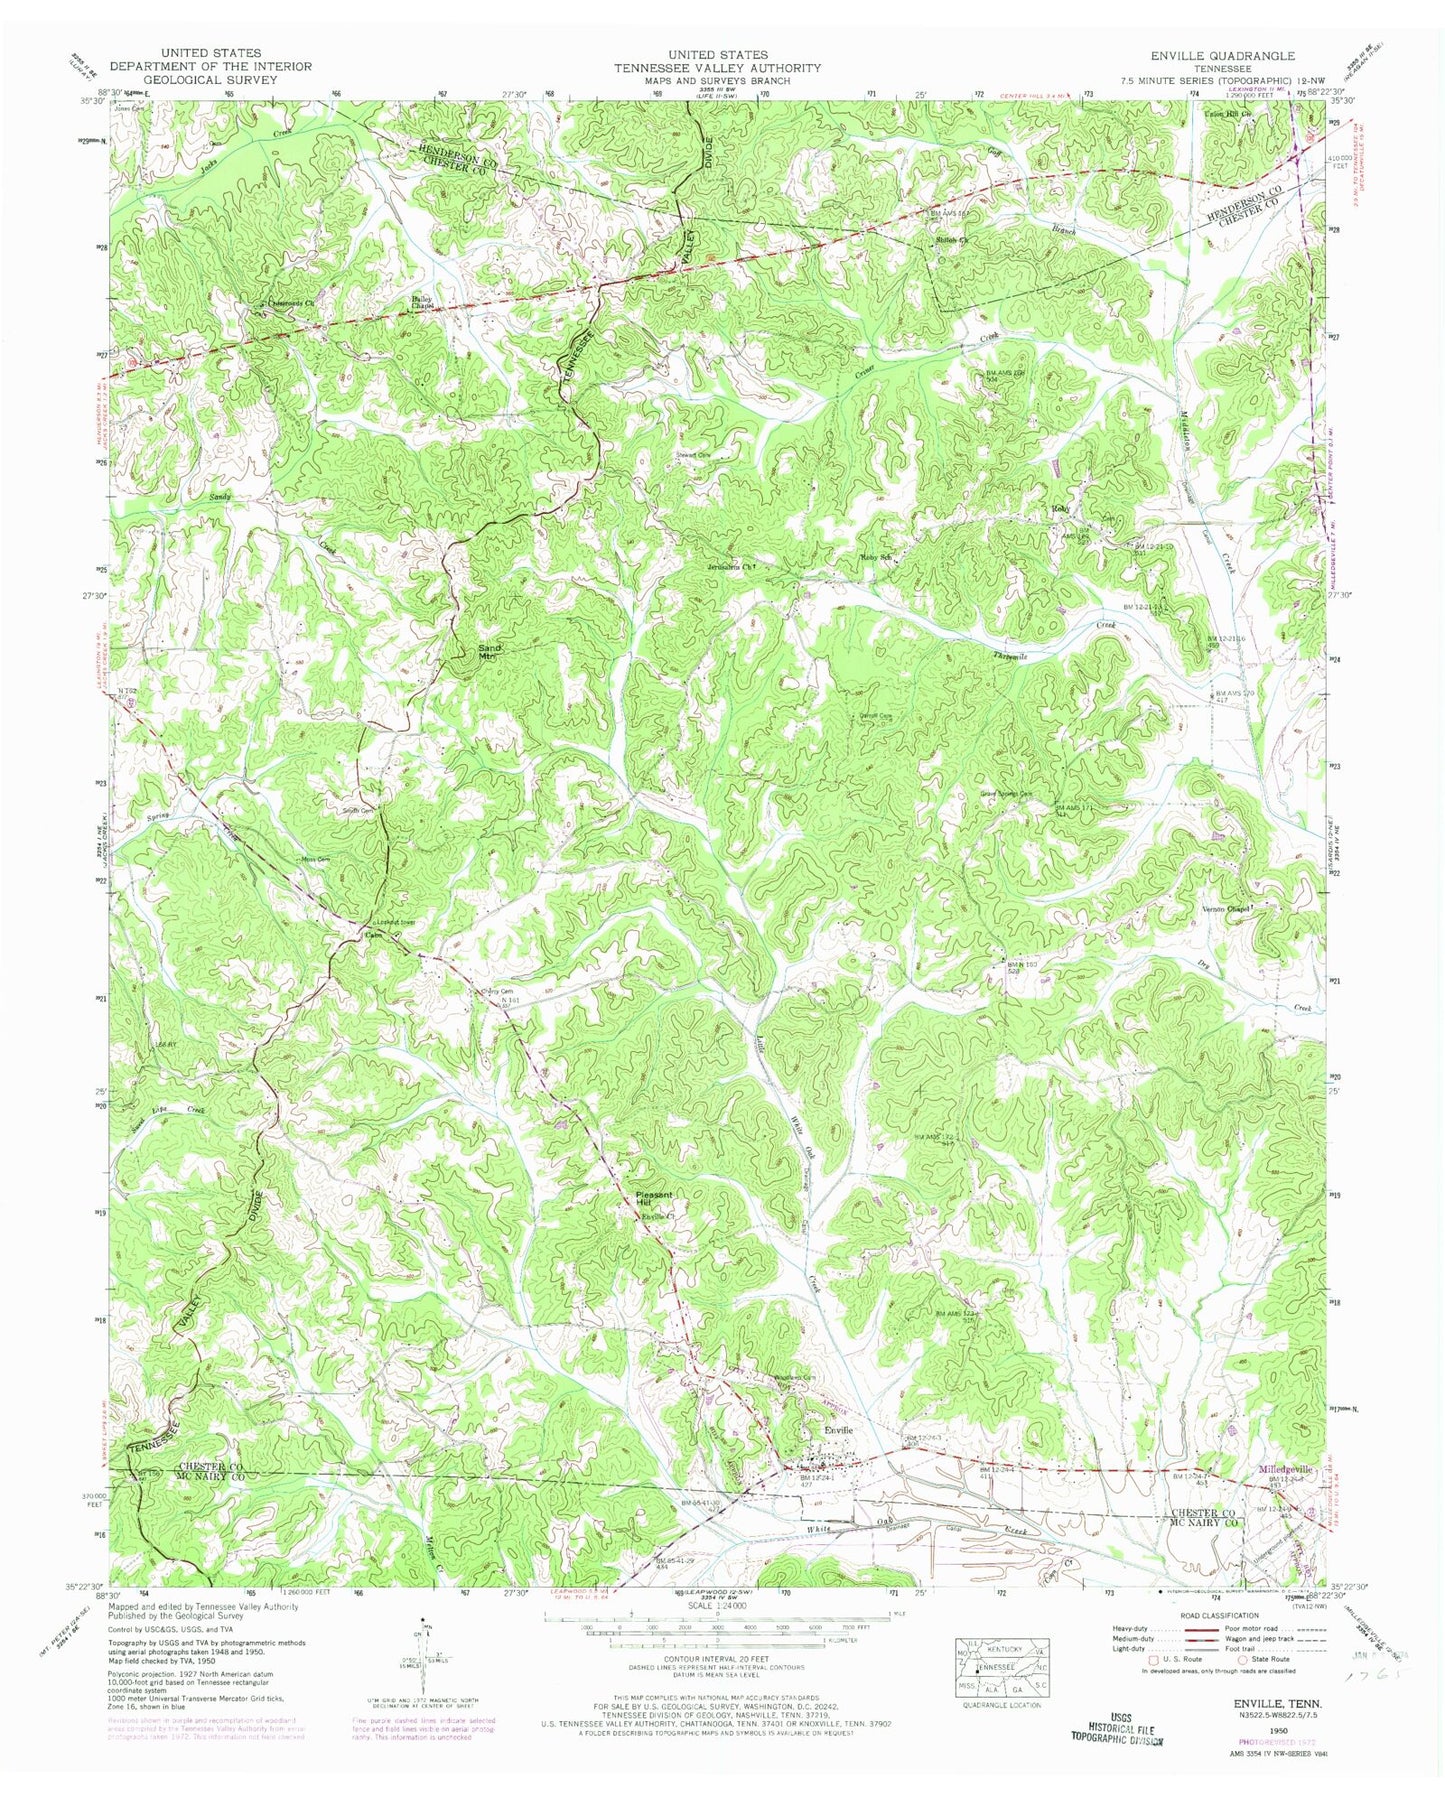 Classic USGS Enville Tennessee 7.5'x7.5' Topo Map Image